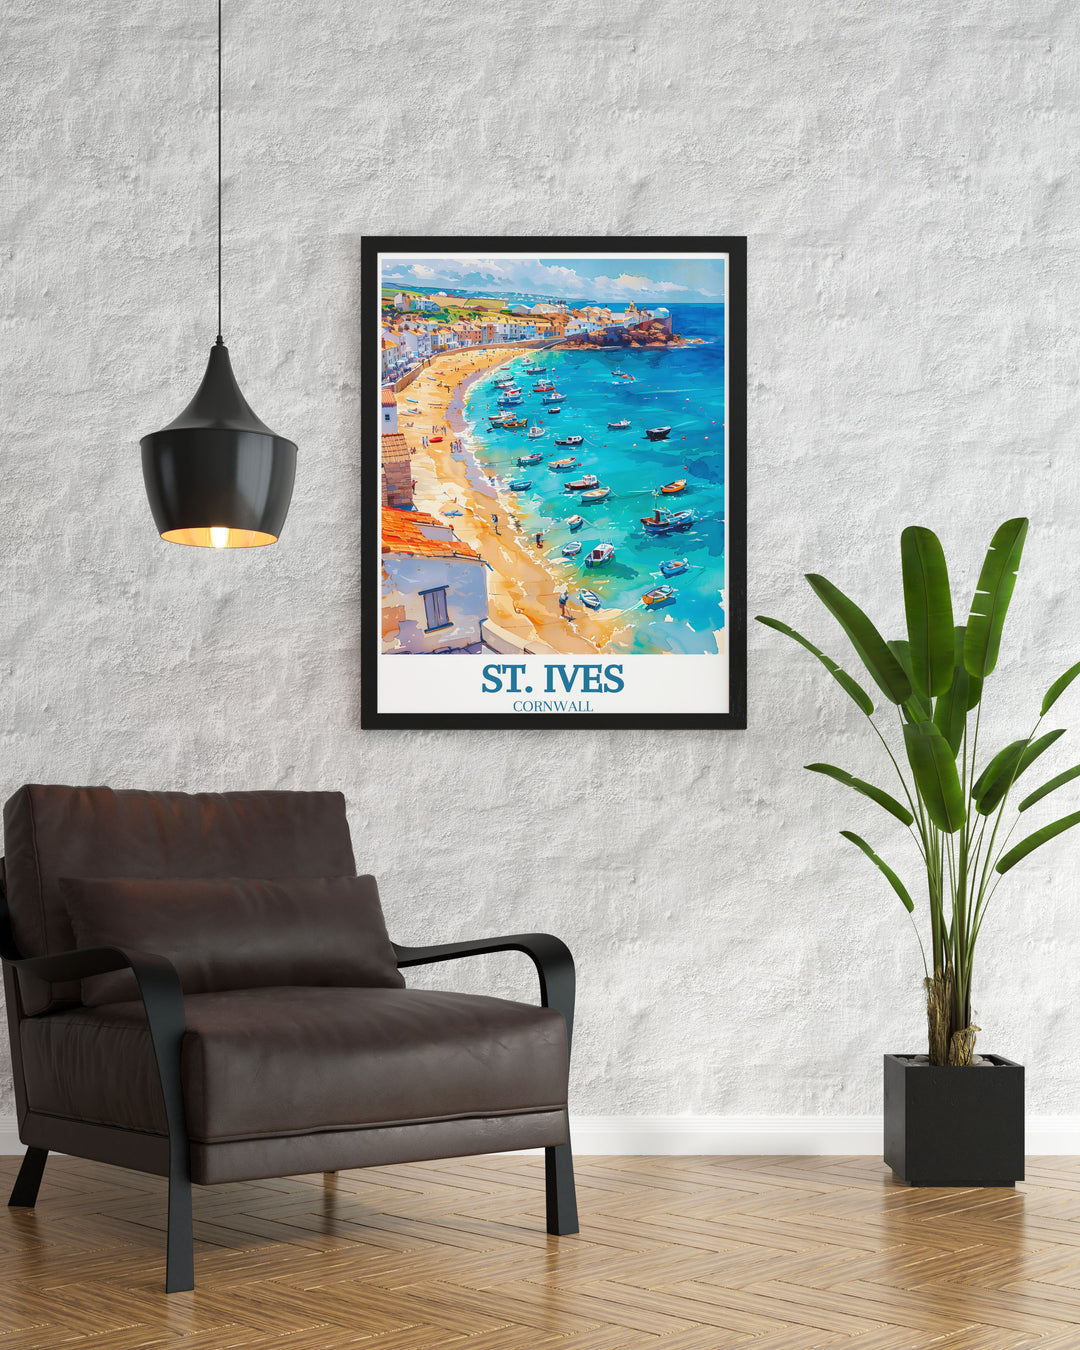 St. Ives and Porthmeor Beach are showcased in this vibrant travel poster, offering a glimpse into the rich heritage and scenic beauty of Cornwalls coast.